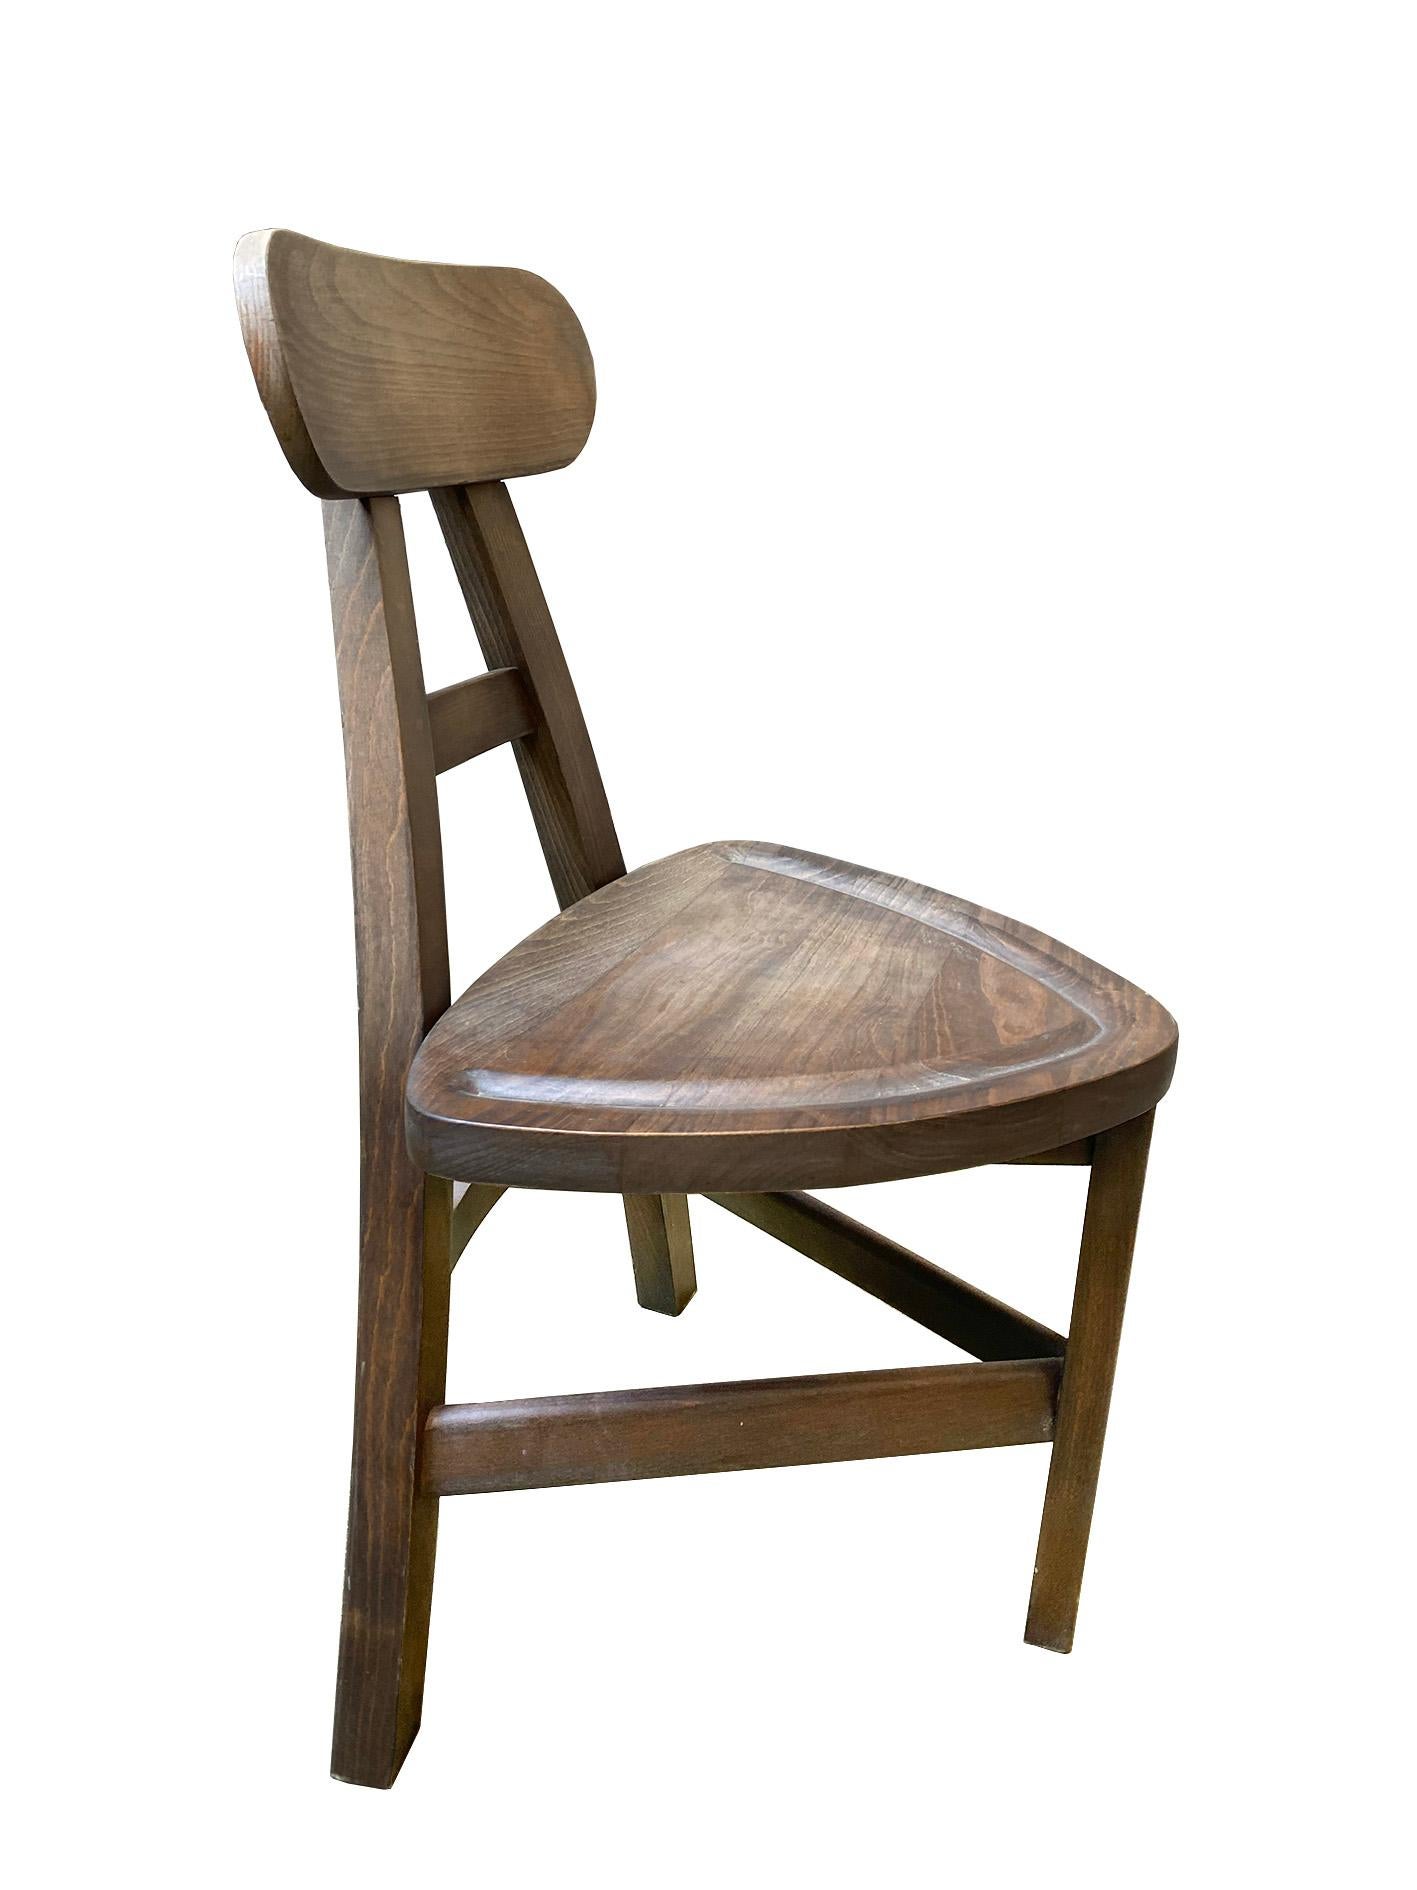 These charming three-legged beech folk style chairs embody a timeless aesthetic that effortlessly bridges the gap between rustic simplicity and enduring craftsmanship. Handcrafted with care and attention to detail, these chairs evoke a sense of